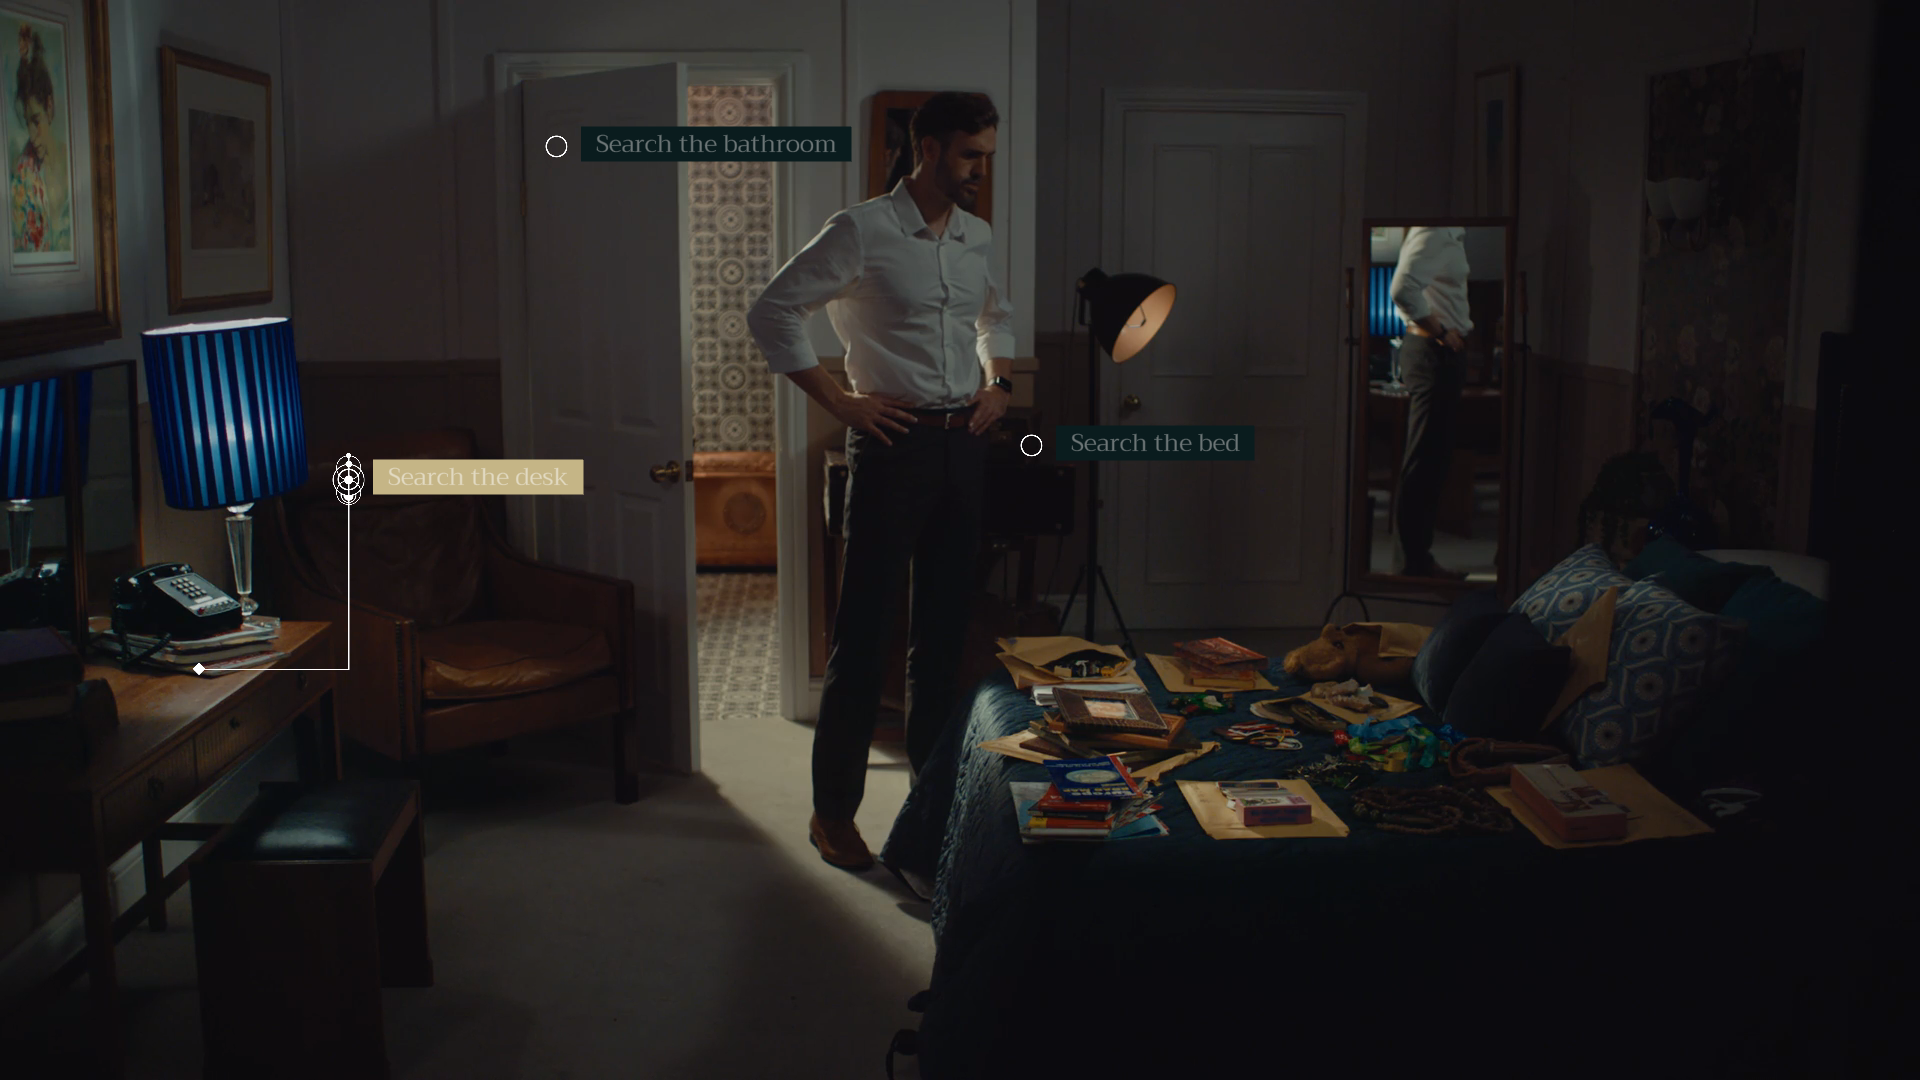 A screenshot from The Isle Tide Hotel. A man wearing a white dress shirt and black slacks is standing in a hotel room with three options: search the desk, search the bathroom, and search the bed.